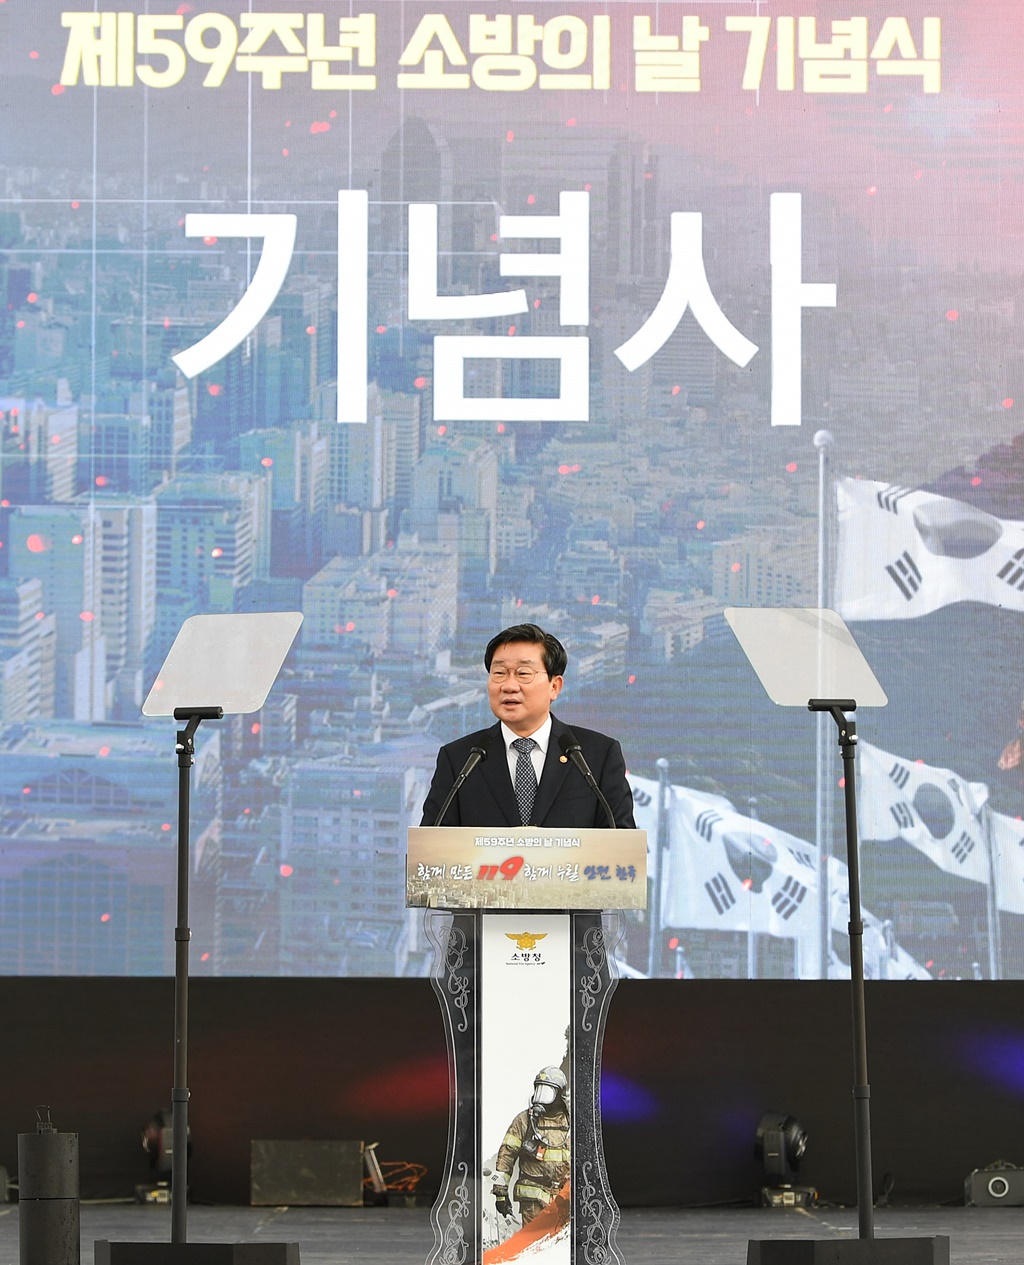 Minister Jeon Hae-cheol of the Interior and Safety is giving opening remarks at the 59th Firefighting Day ceremony held at the site for National Firefighting Hospital at Eumseong-gun, Chungbuk Province on Nov. 9.  